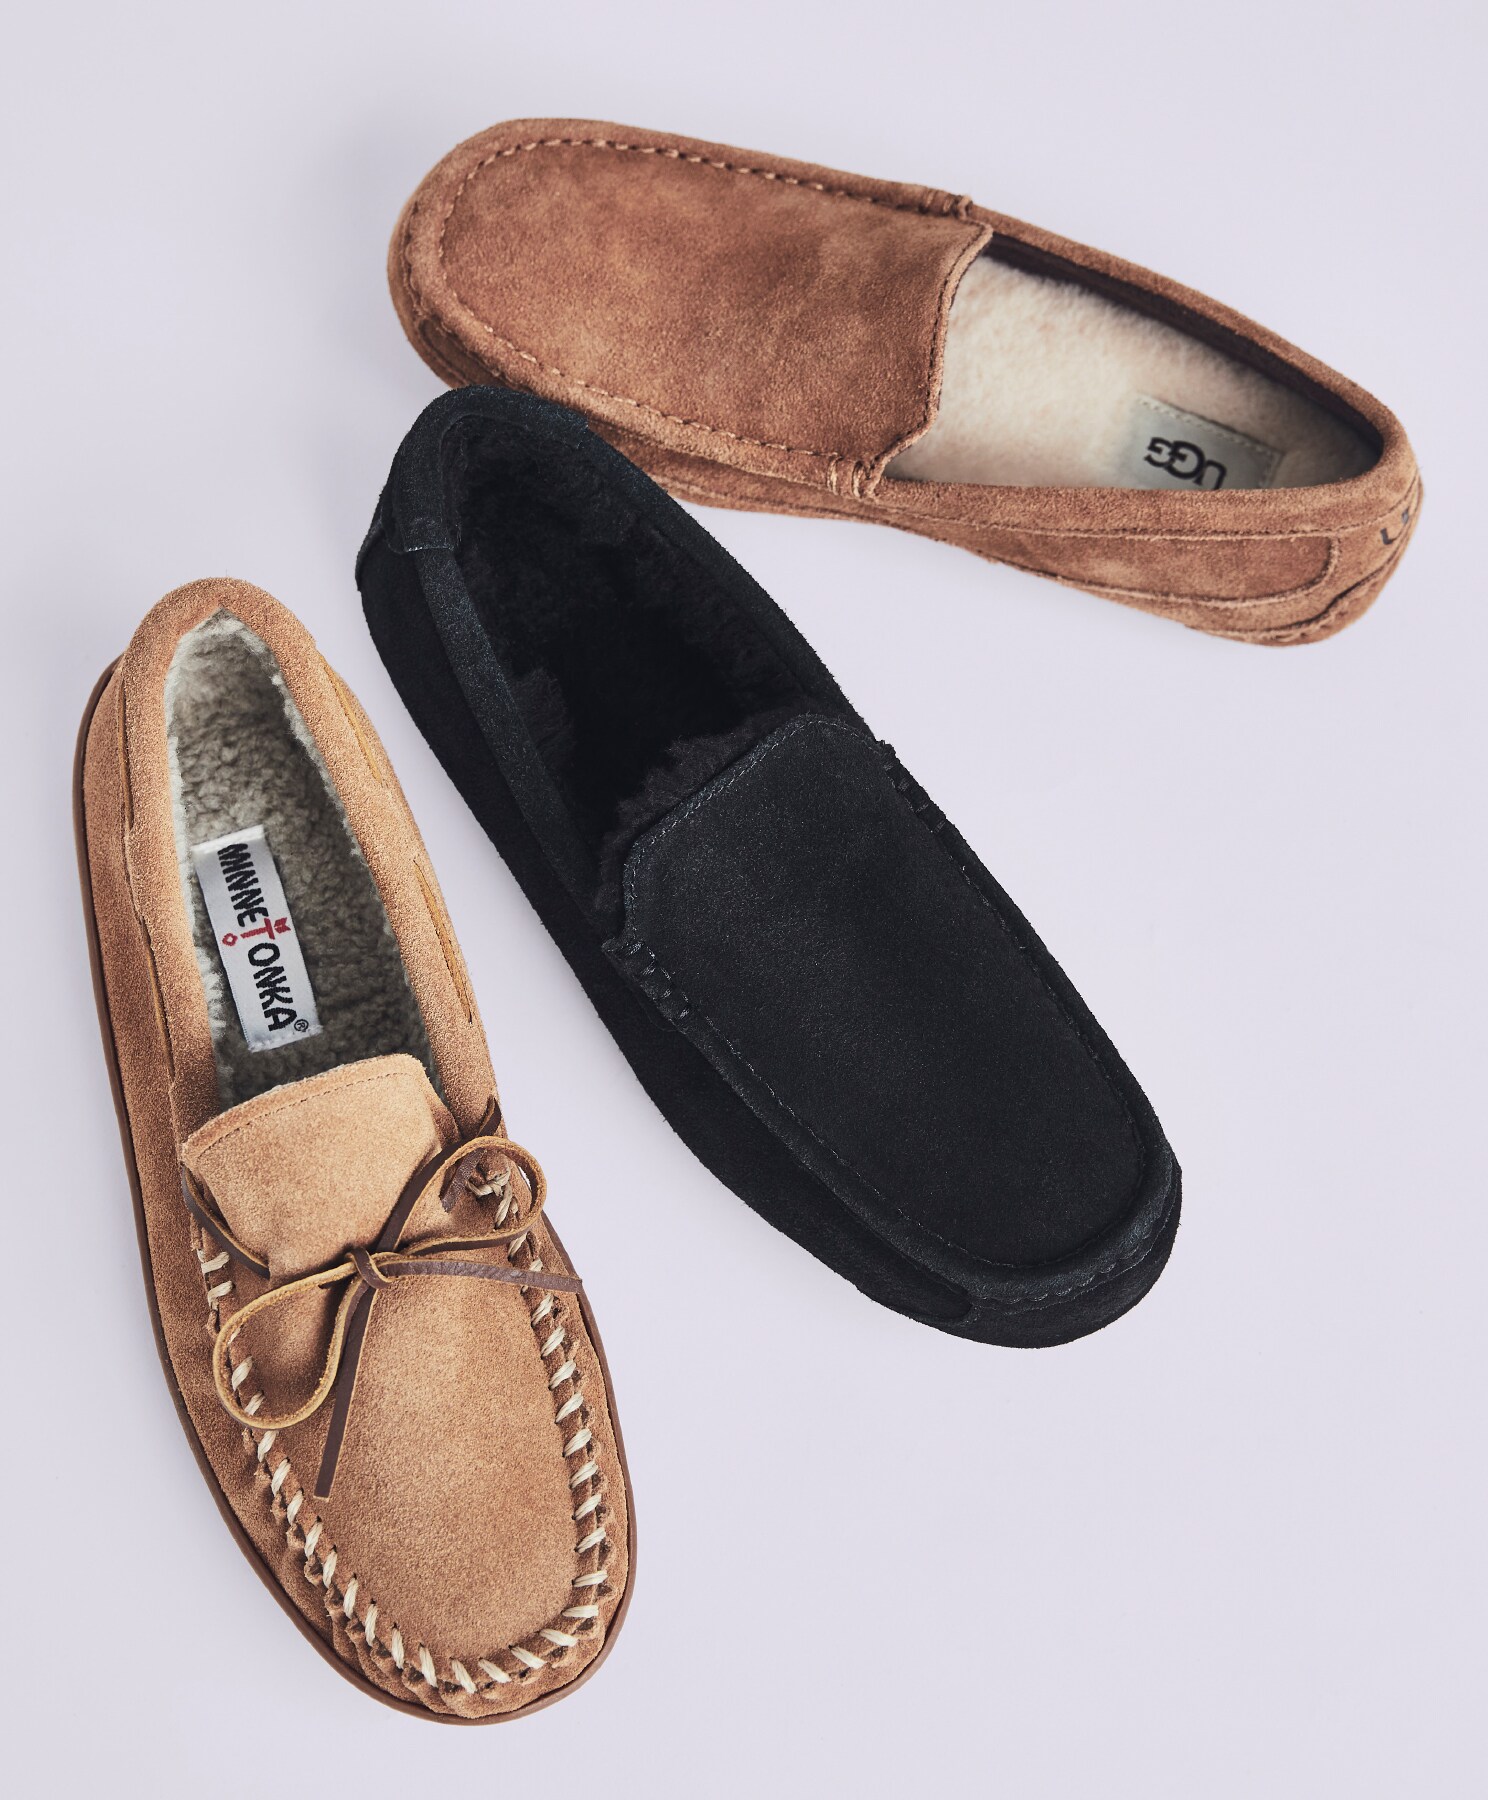 dsw mens casual loafers